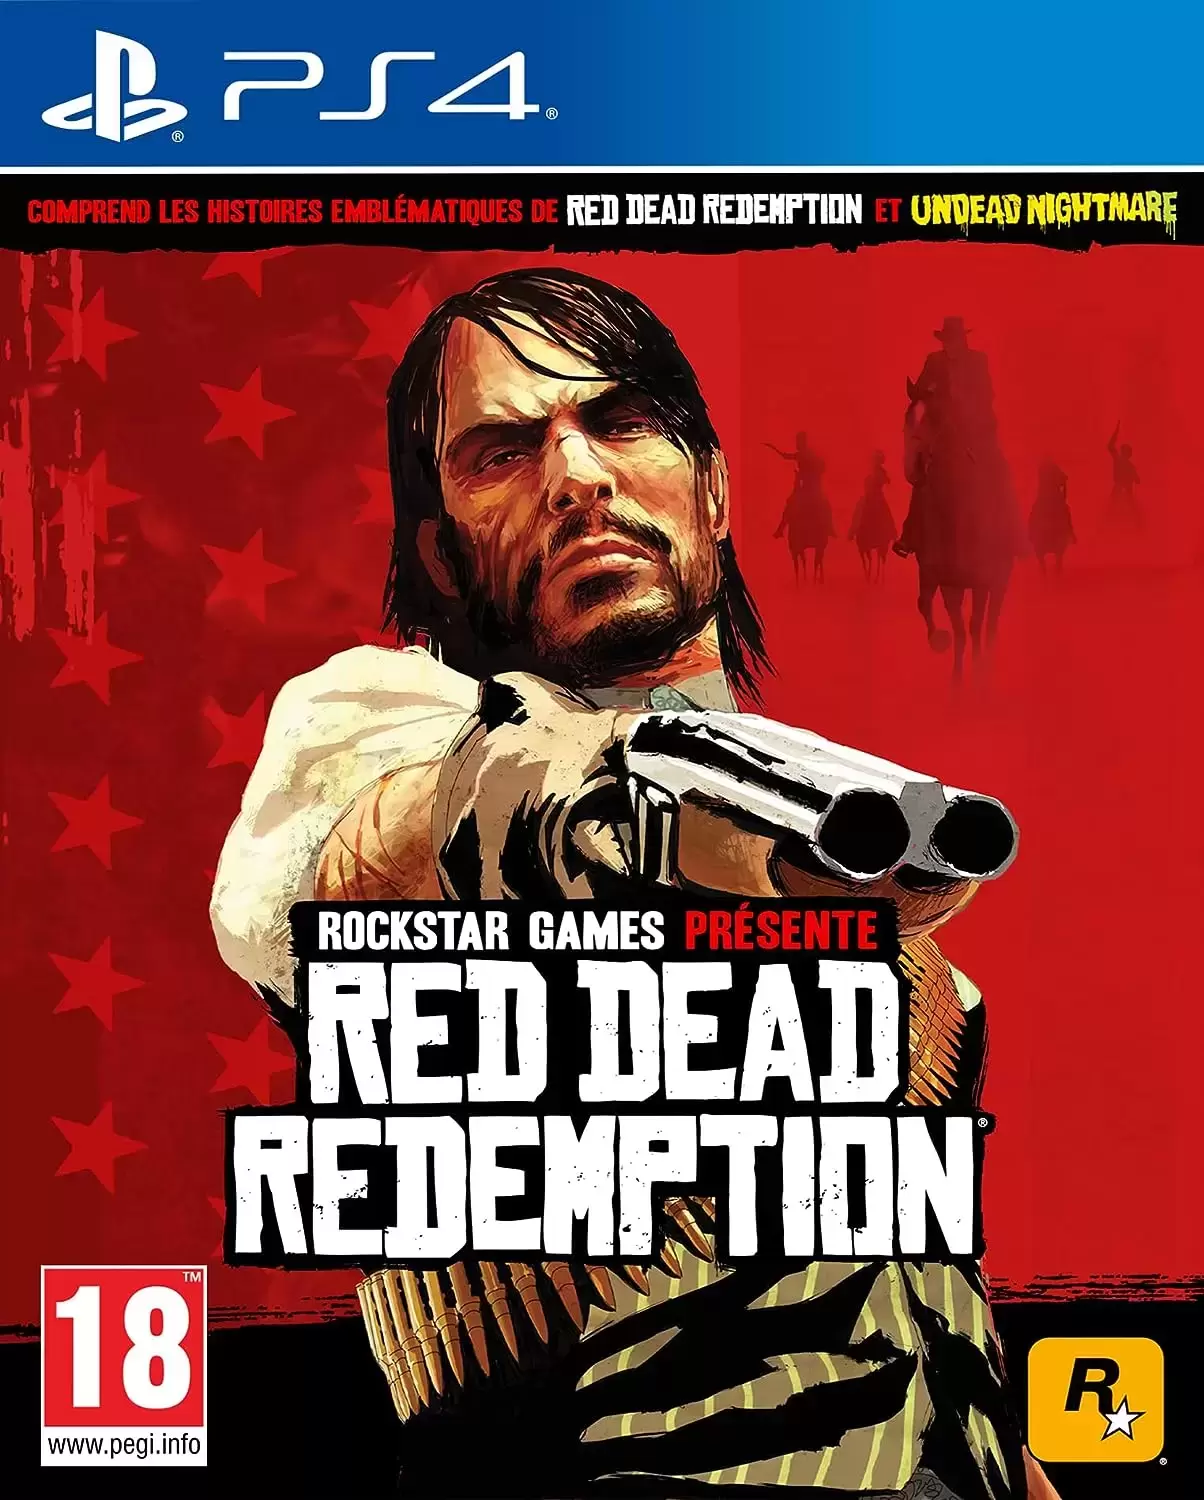 PS4 Games - Red Dead Redemption